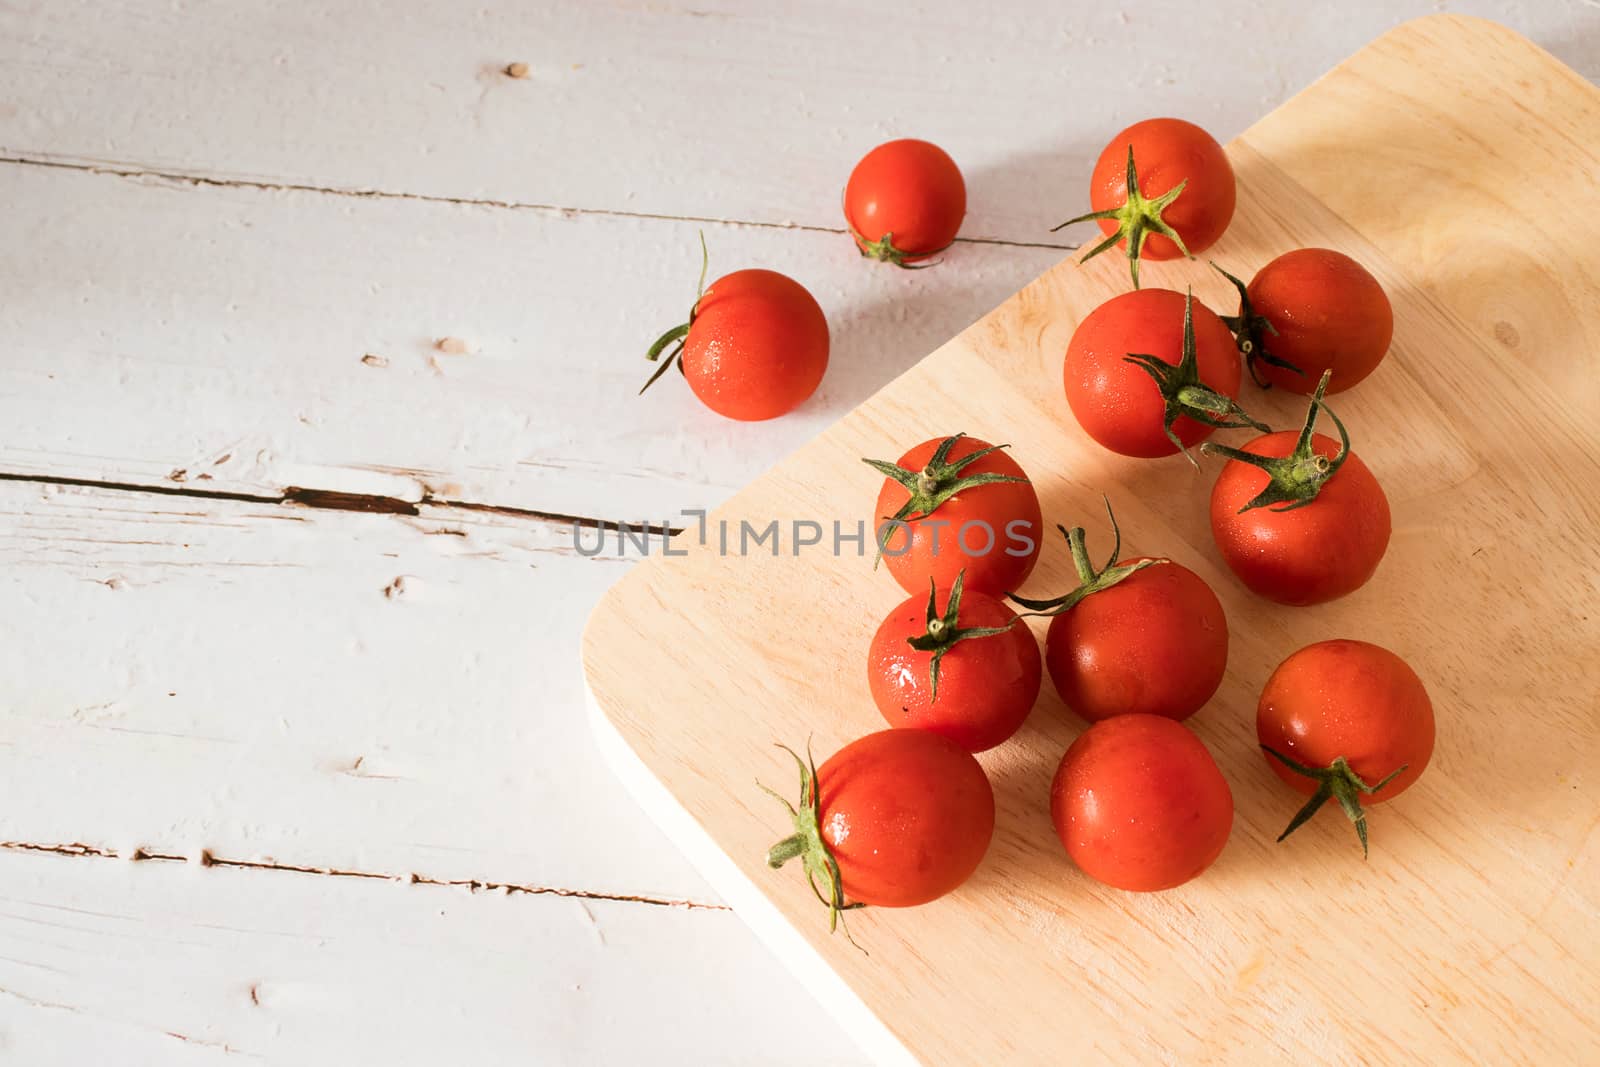 Red tomato on a cutting board wiht wooden background. by Khankeawsanan